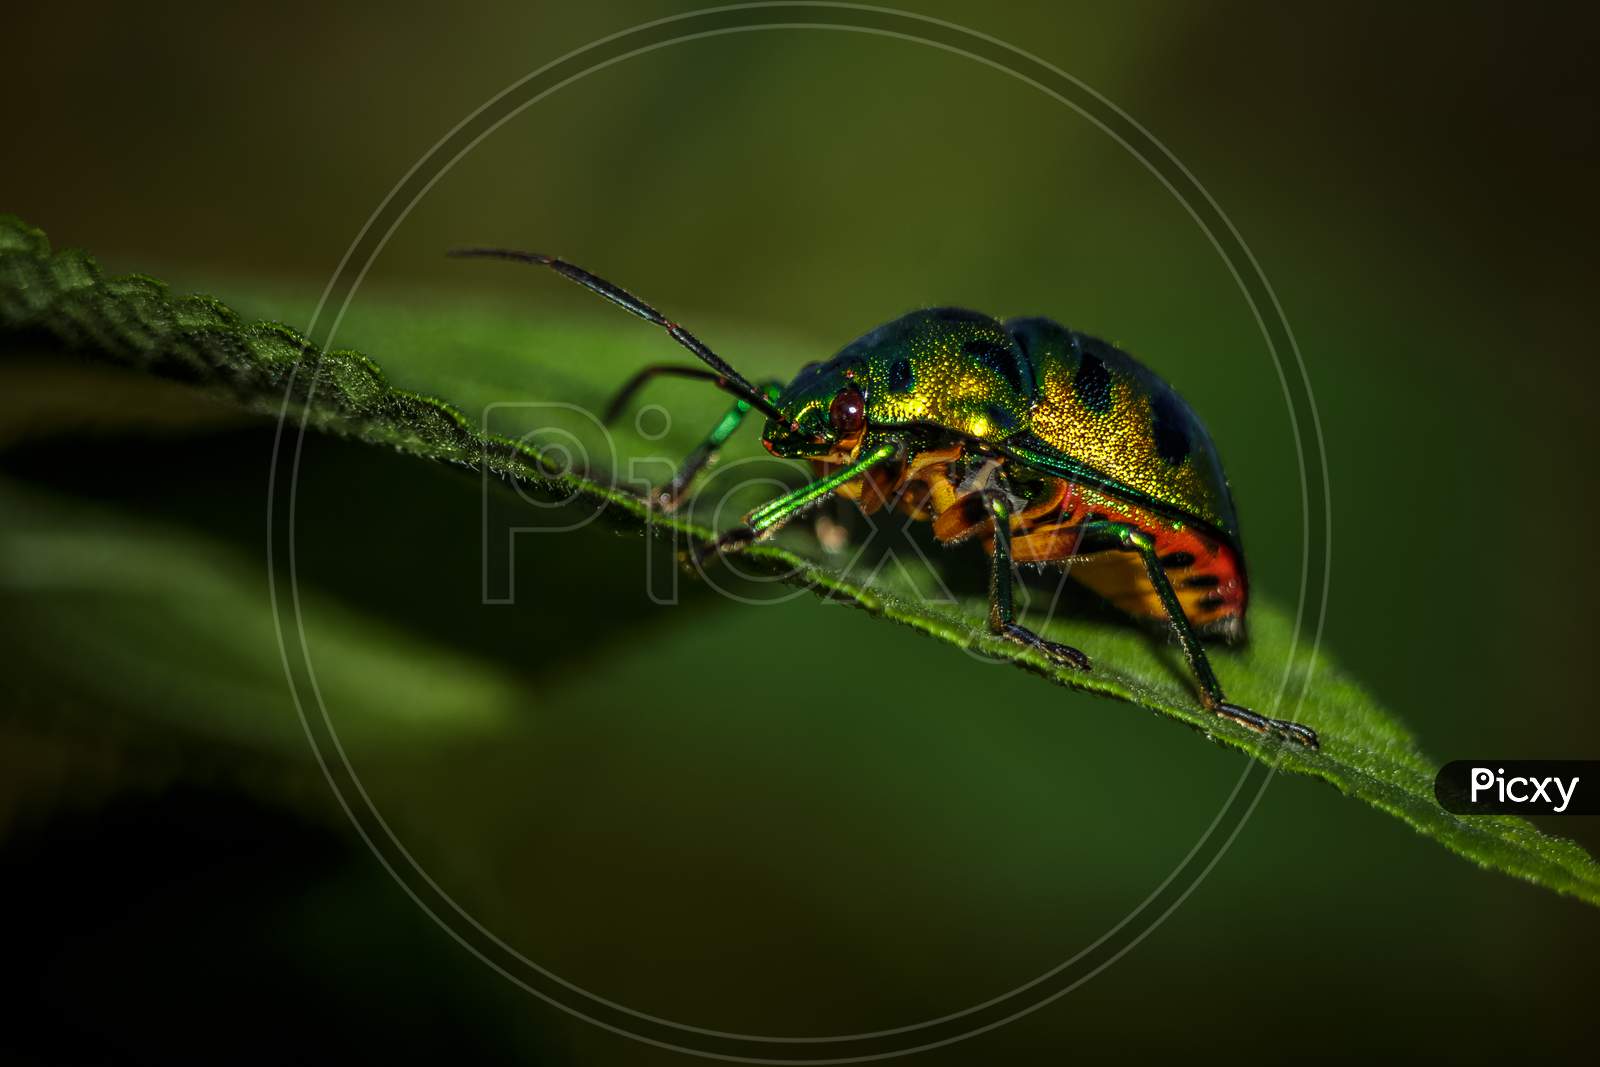 Jewel Bug Beetle On Leaf, Lychee Shield Is Also Called As Chrysocoris Stollii. Scutelleridae Is A Family Of True Bugs. Lychee Shield Bug